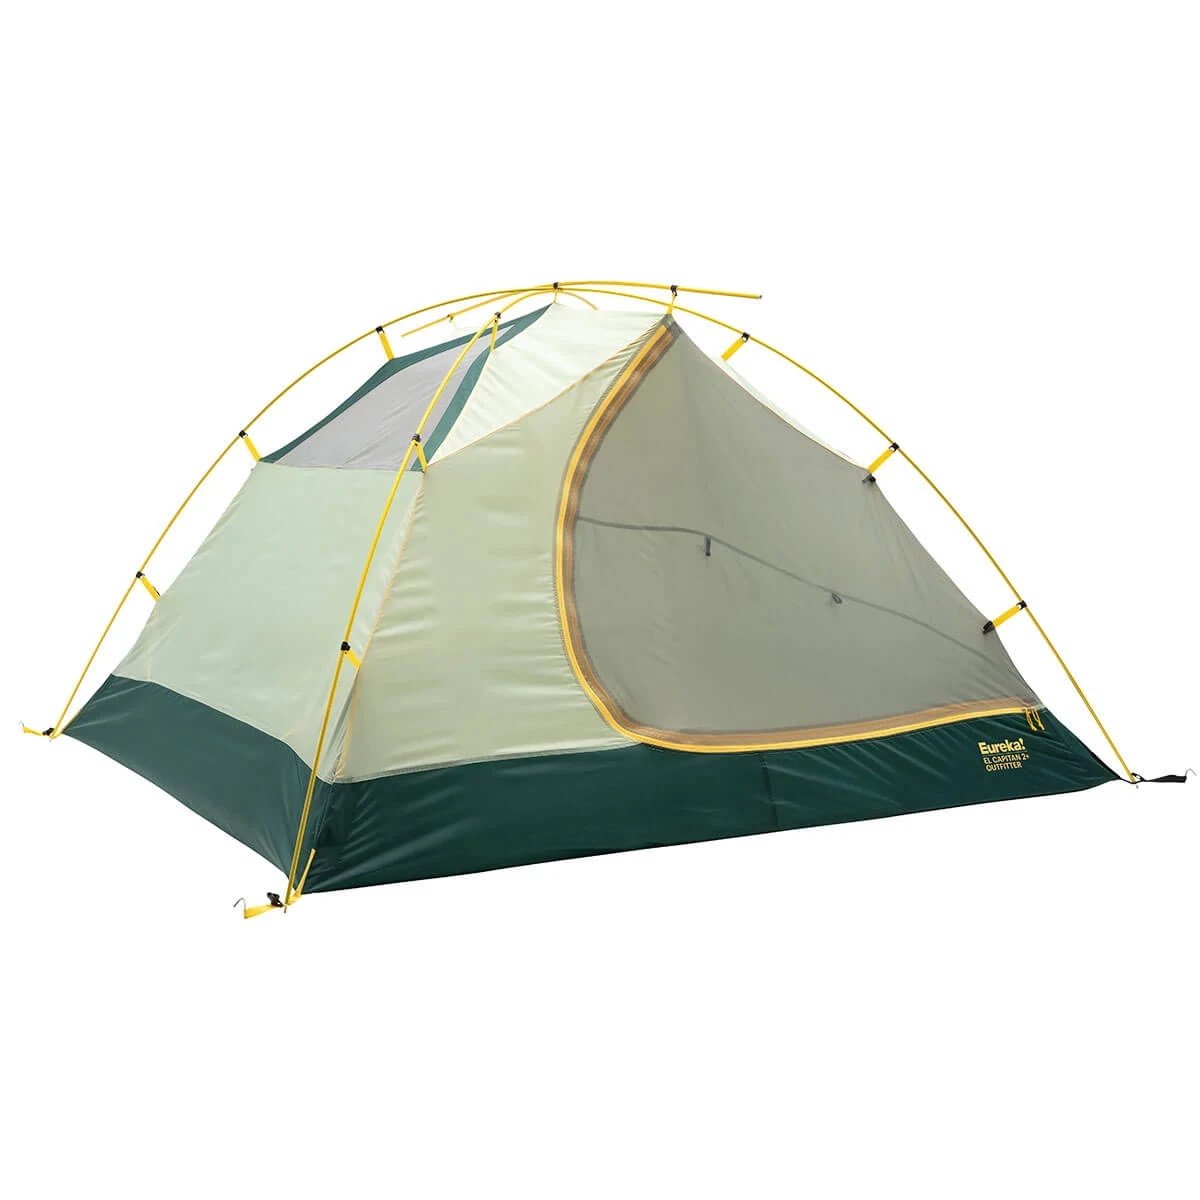 Eureka! El Capitan 2+ Outfitter tent without rainfly